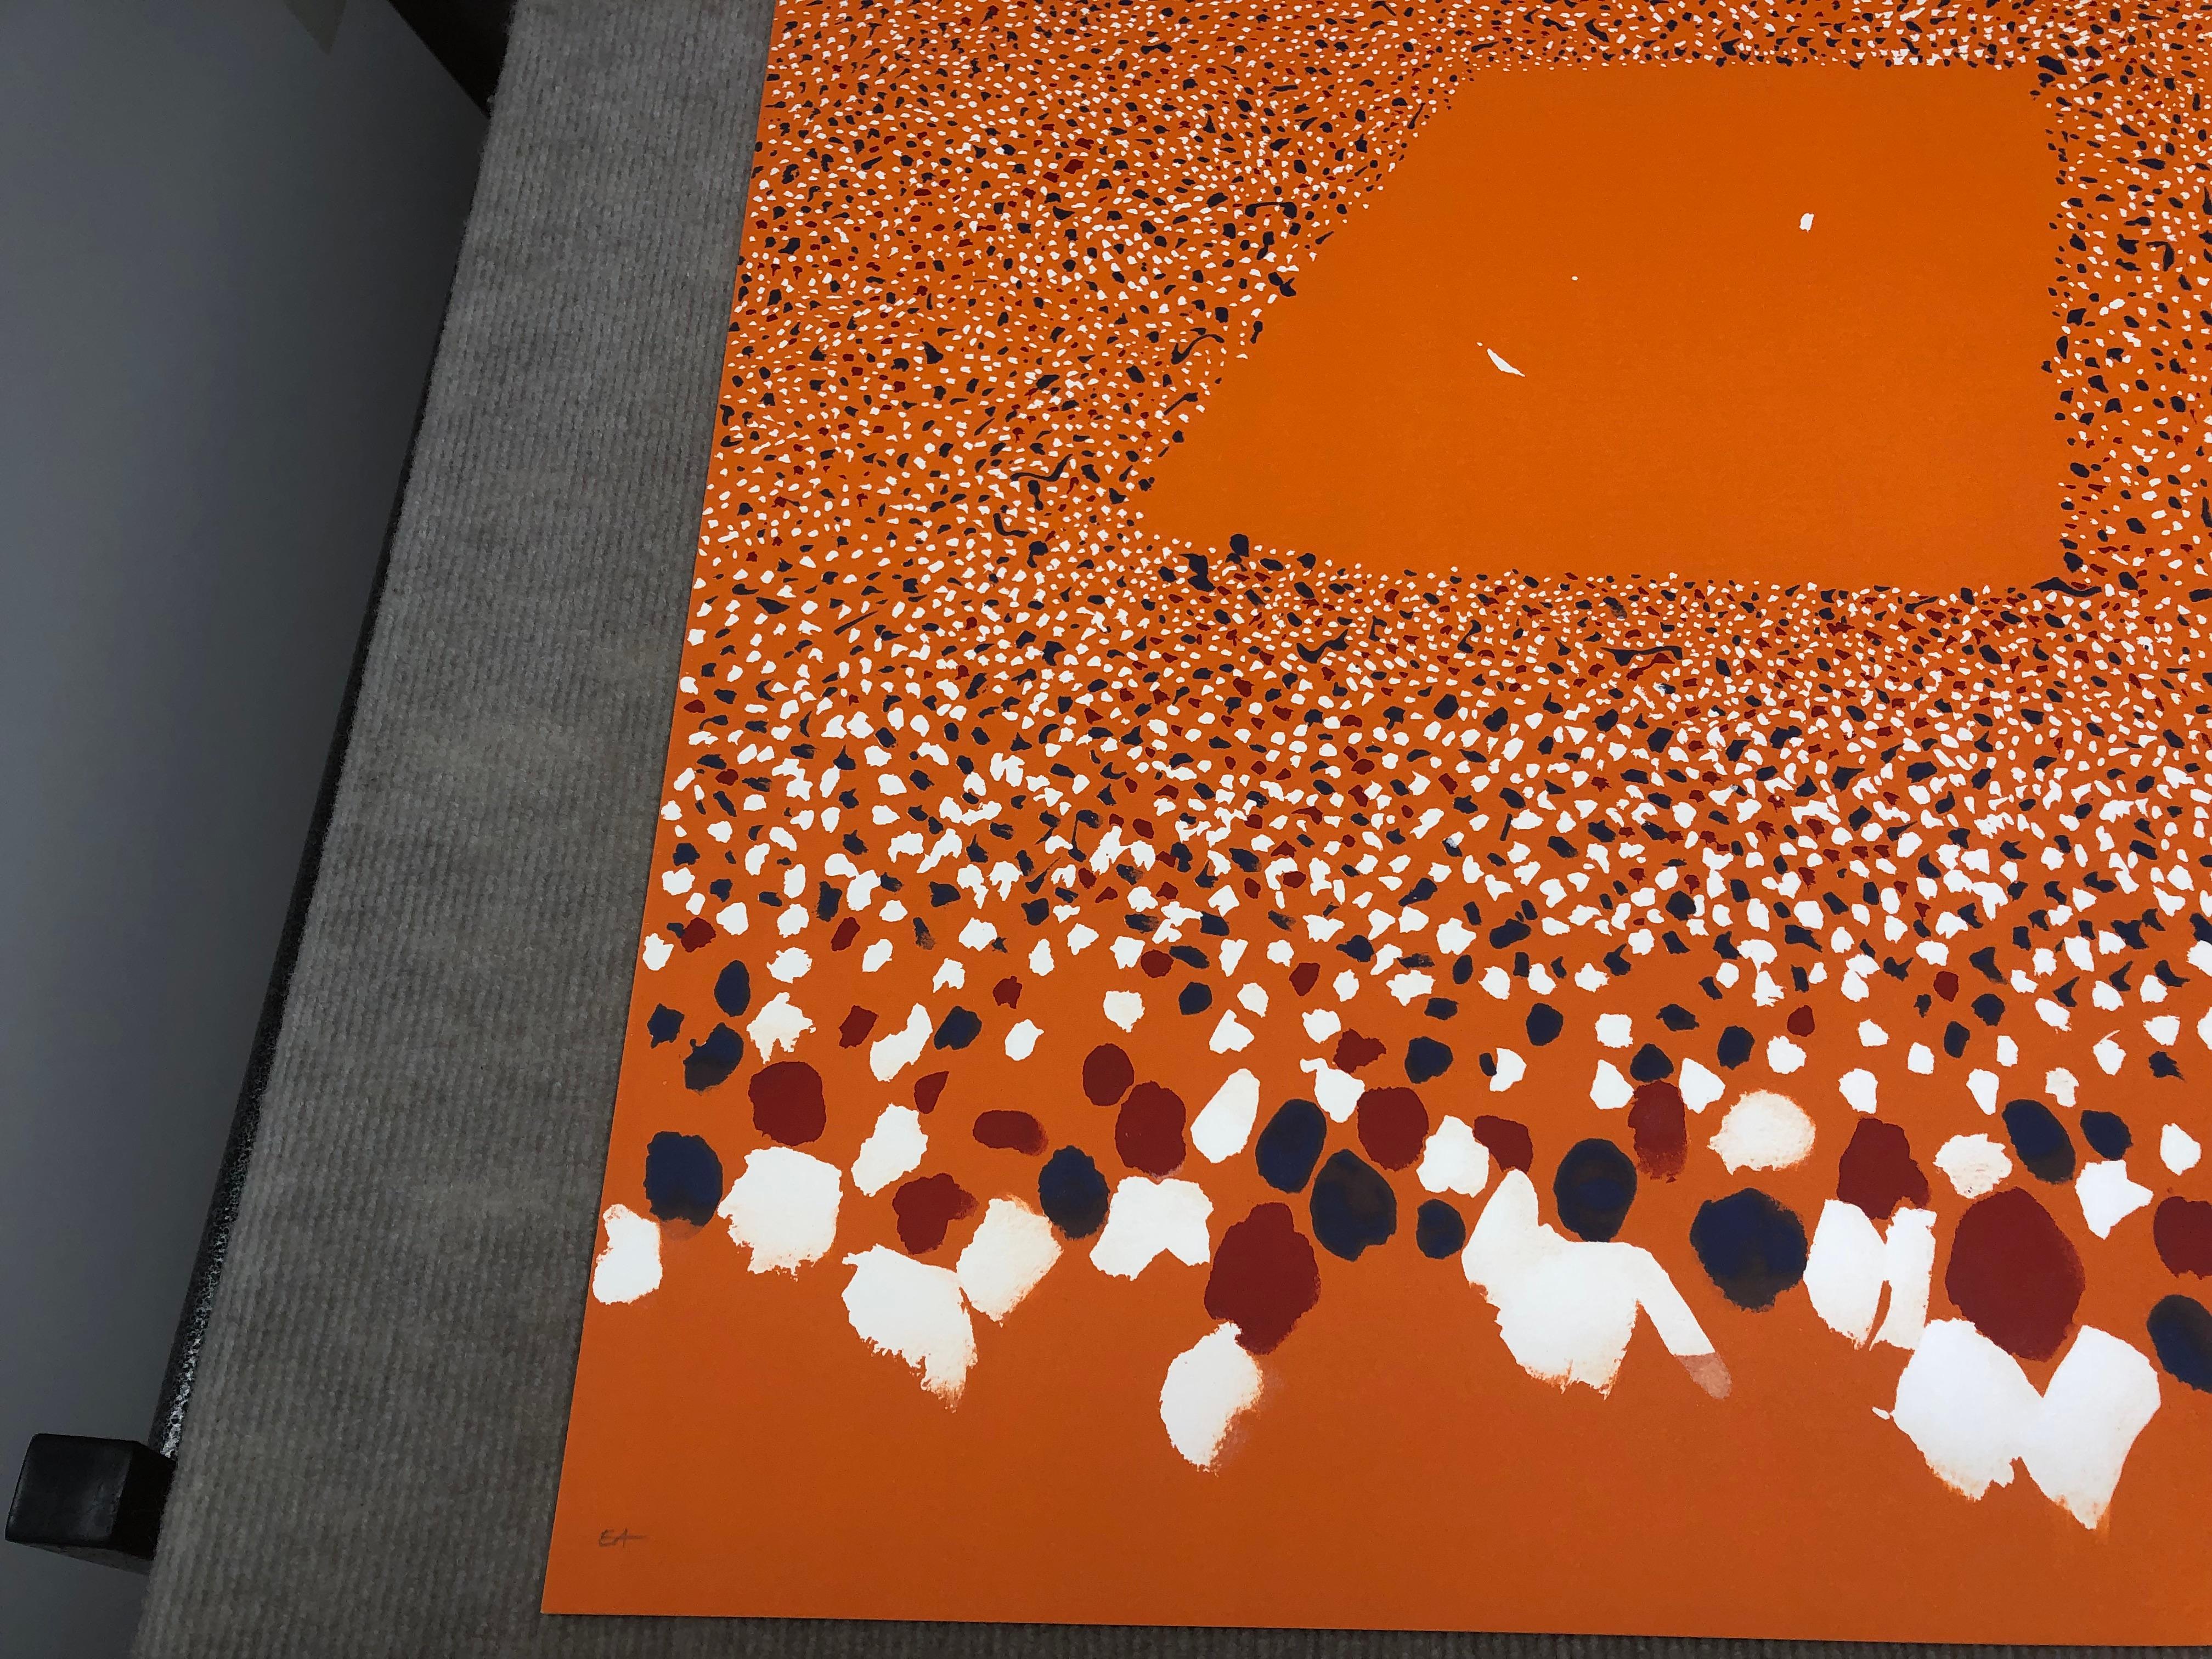 1984 Gilles Aillaud 'Roland Garros French Open' Pop Art Orange France Lithograph 12